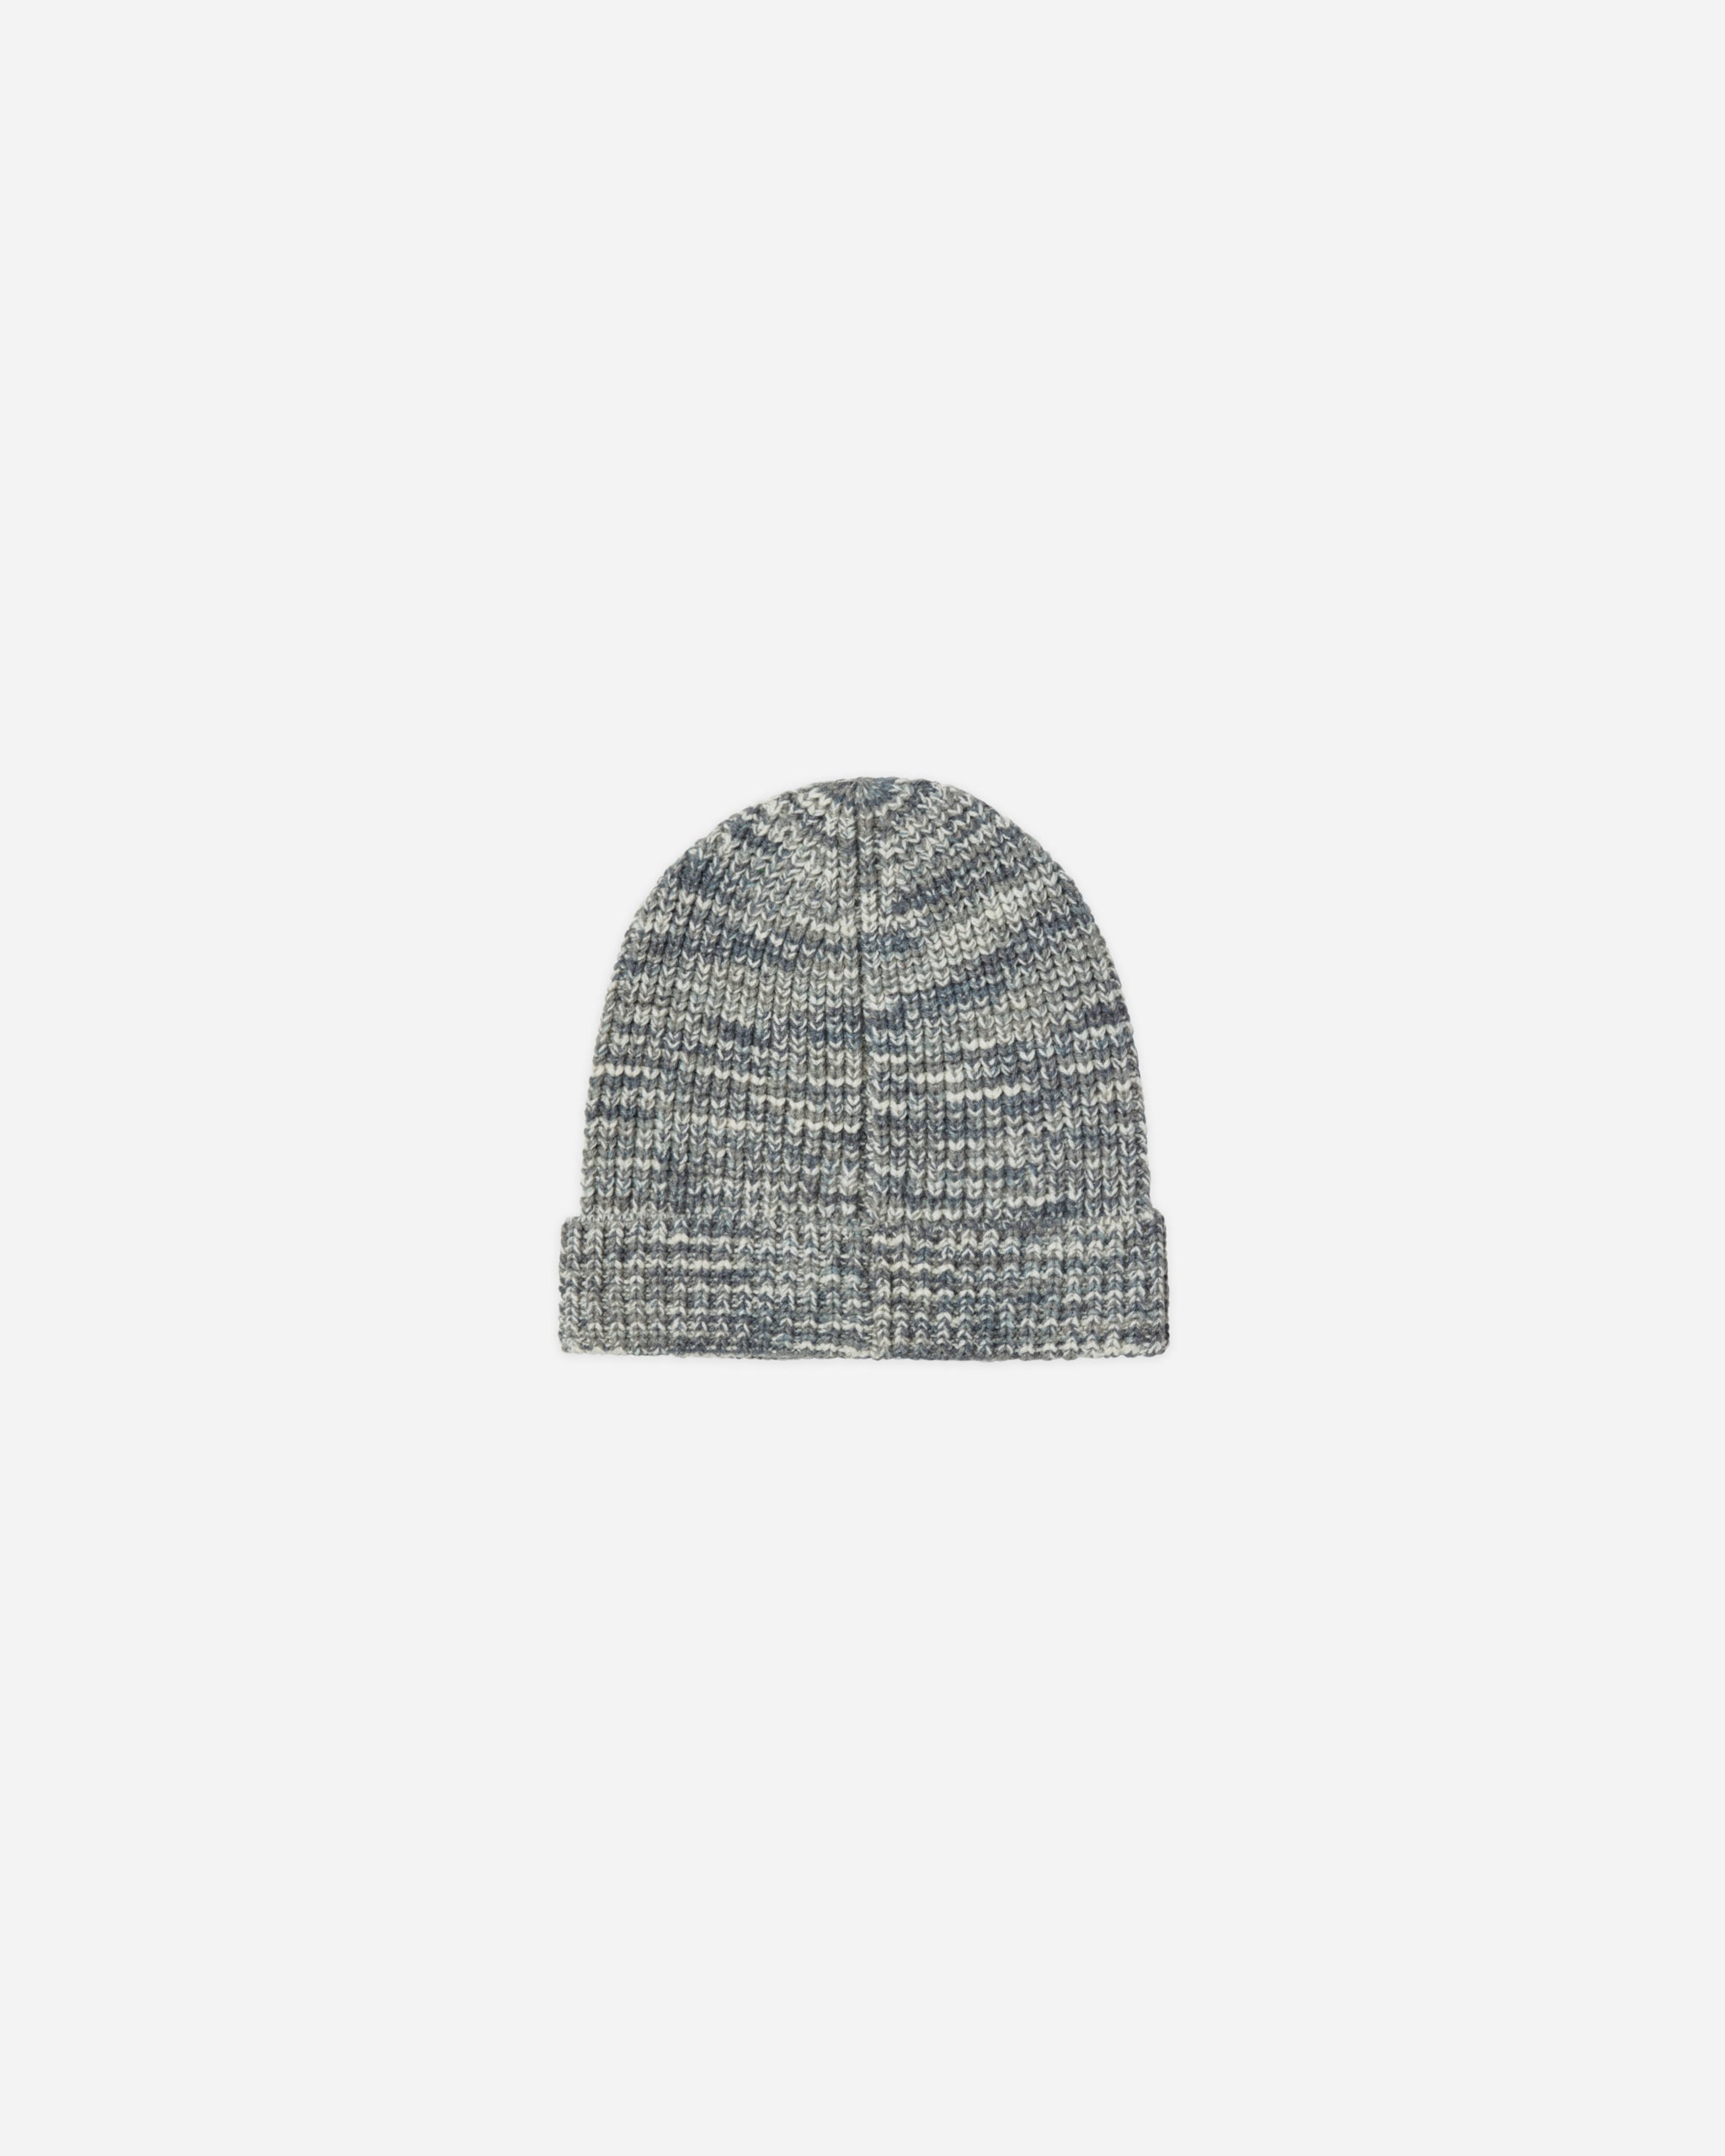 Beanie || Heathered Slate - Rylee + Cru | Kids Clothes | Trendy Baby Clothes | Modern Infant Outfits |